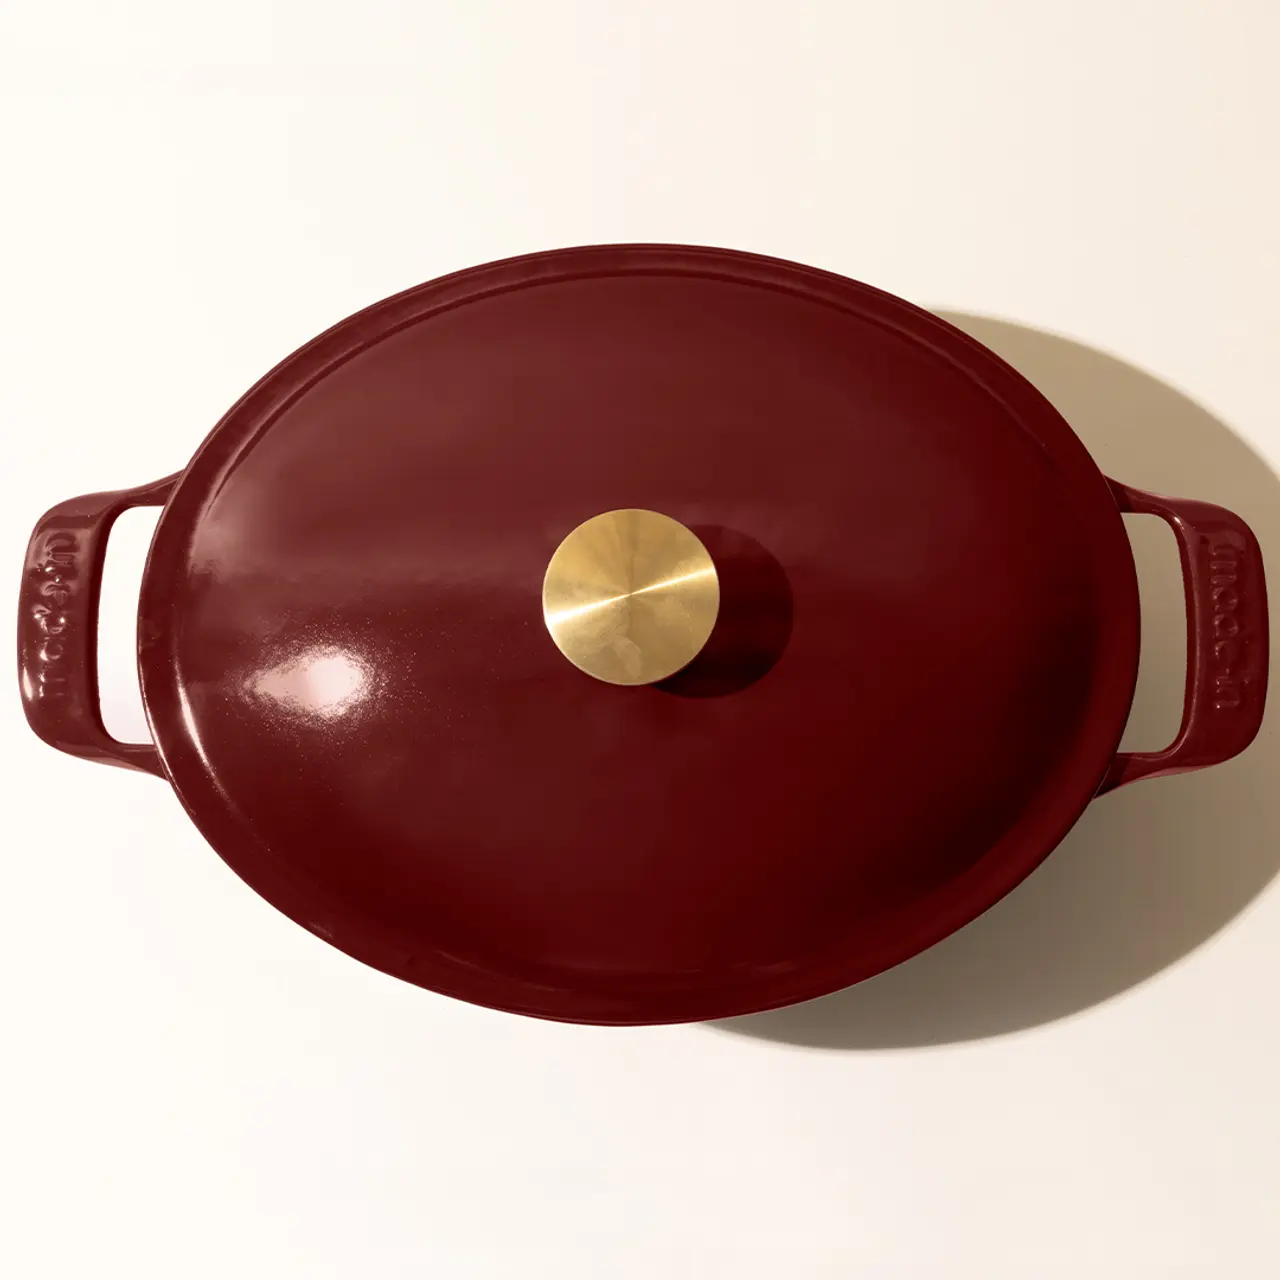 A red enameled cast iron Dutch oven with a lid featuring a golden knob, viewed from above.